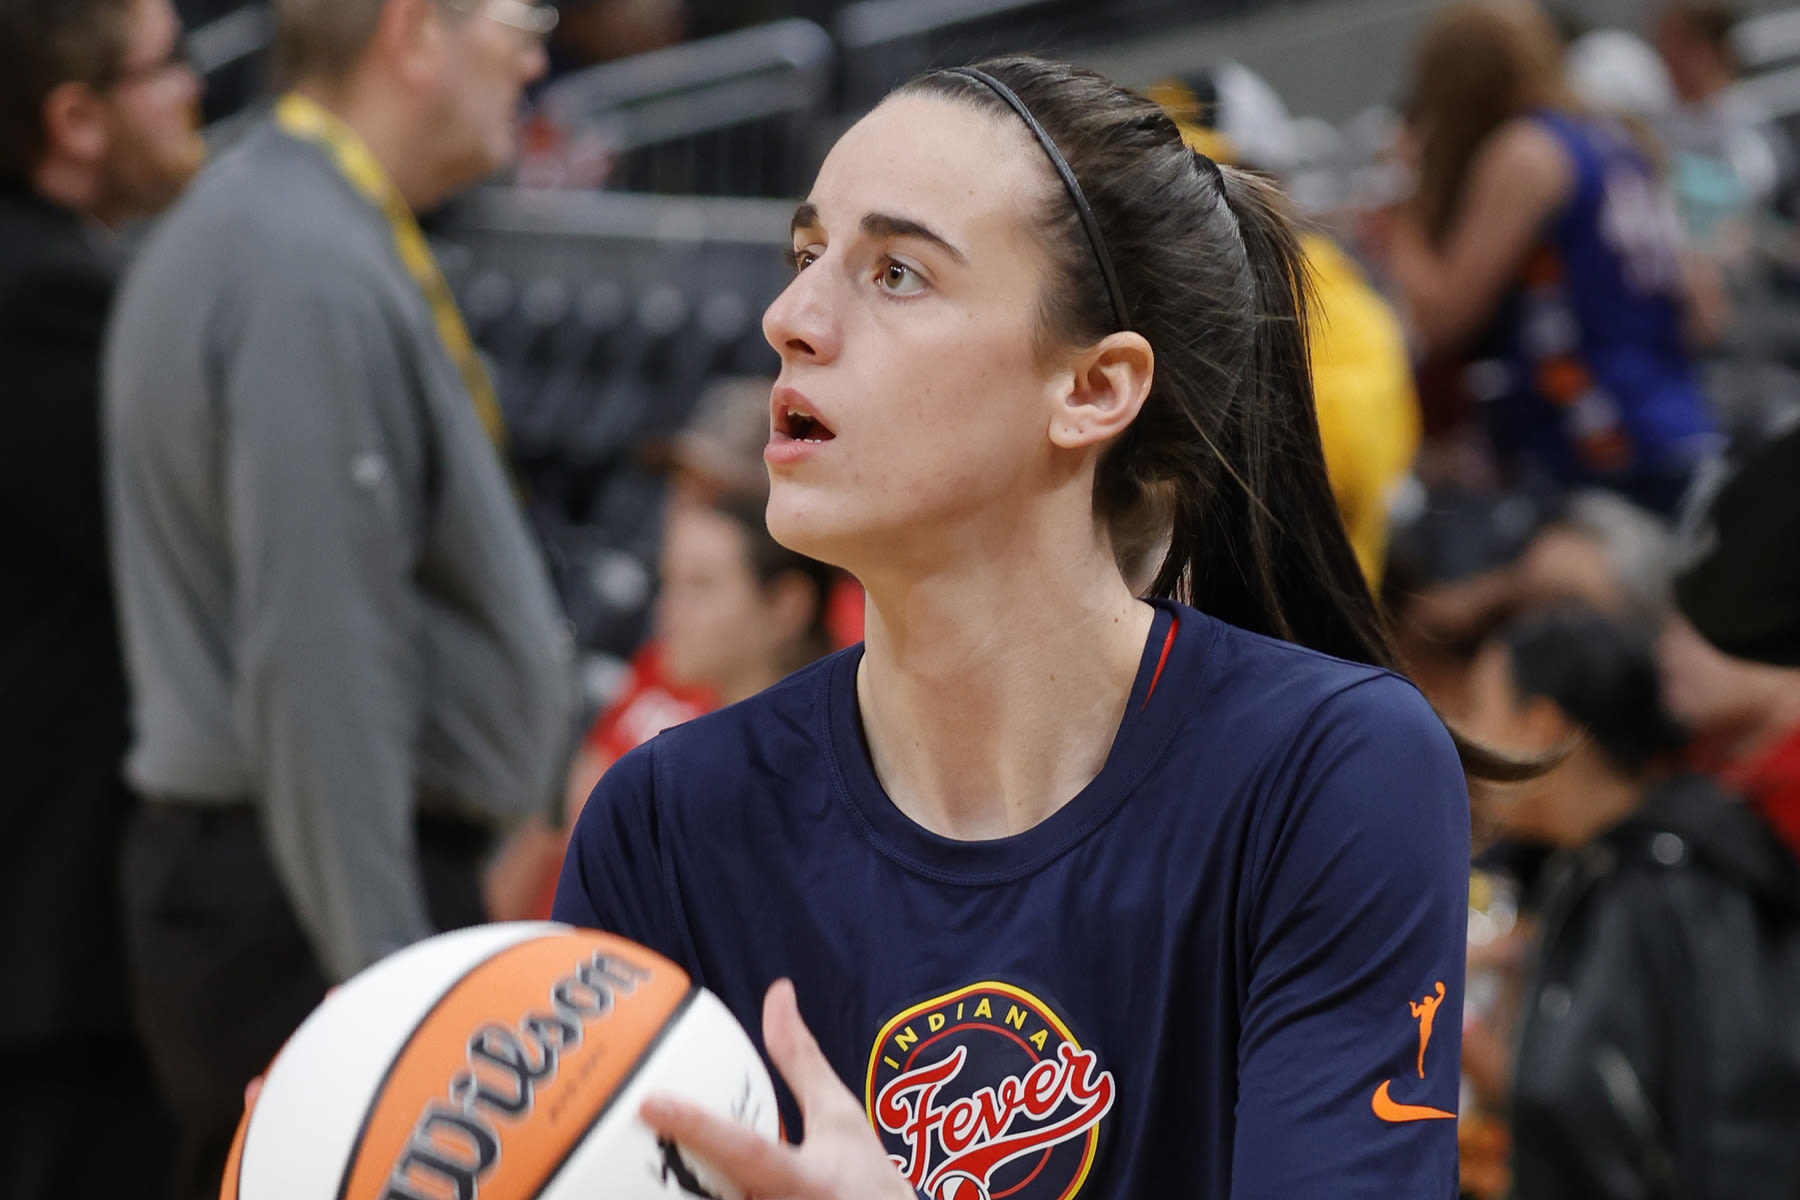 Indiana Fever vs. Connecticut Sun Livestream: How to Watch Caitlin Clark’s First WNBA Game Online